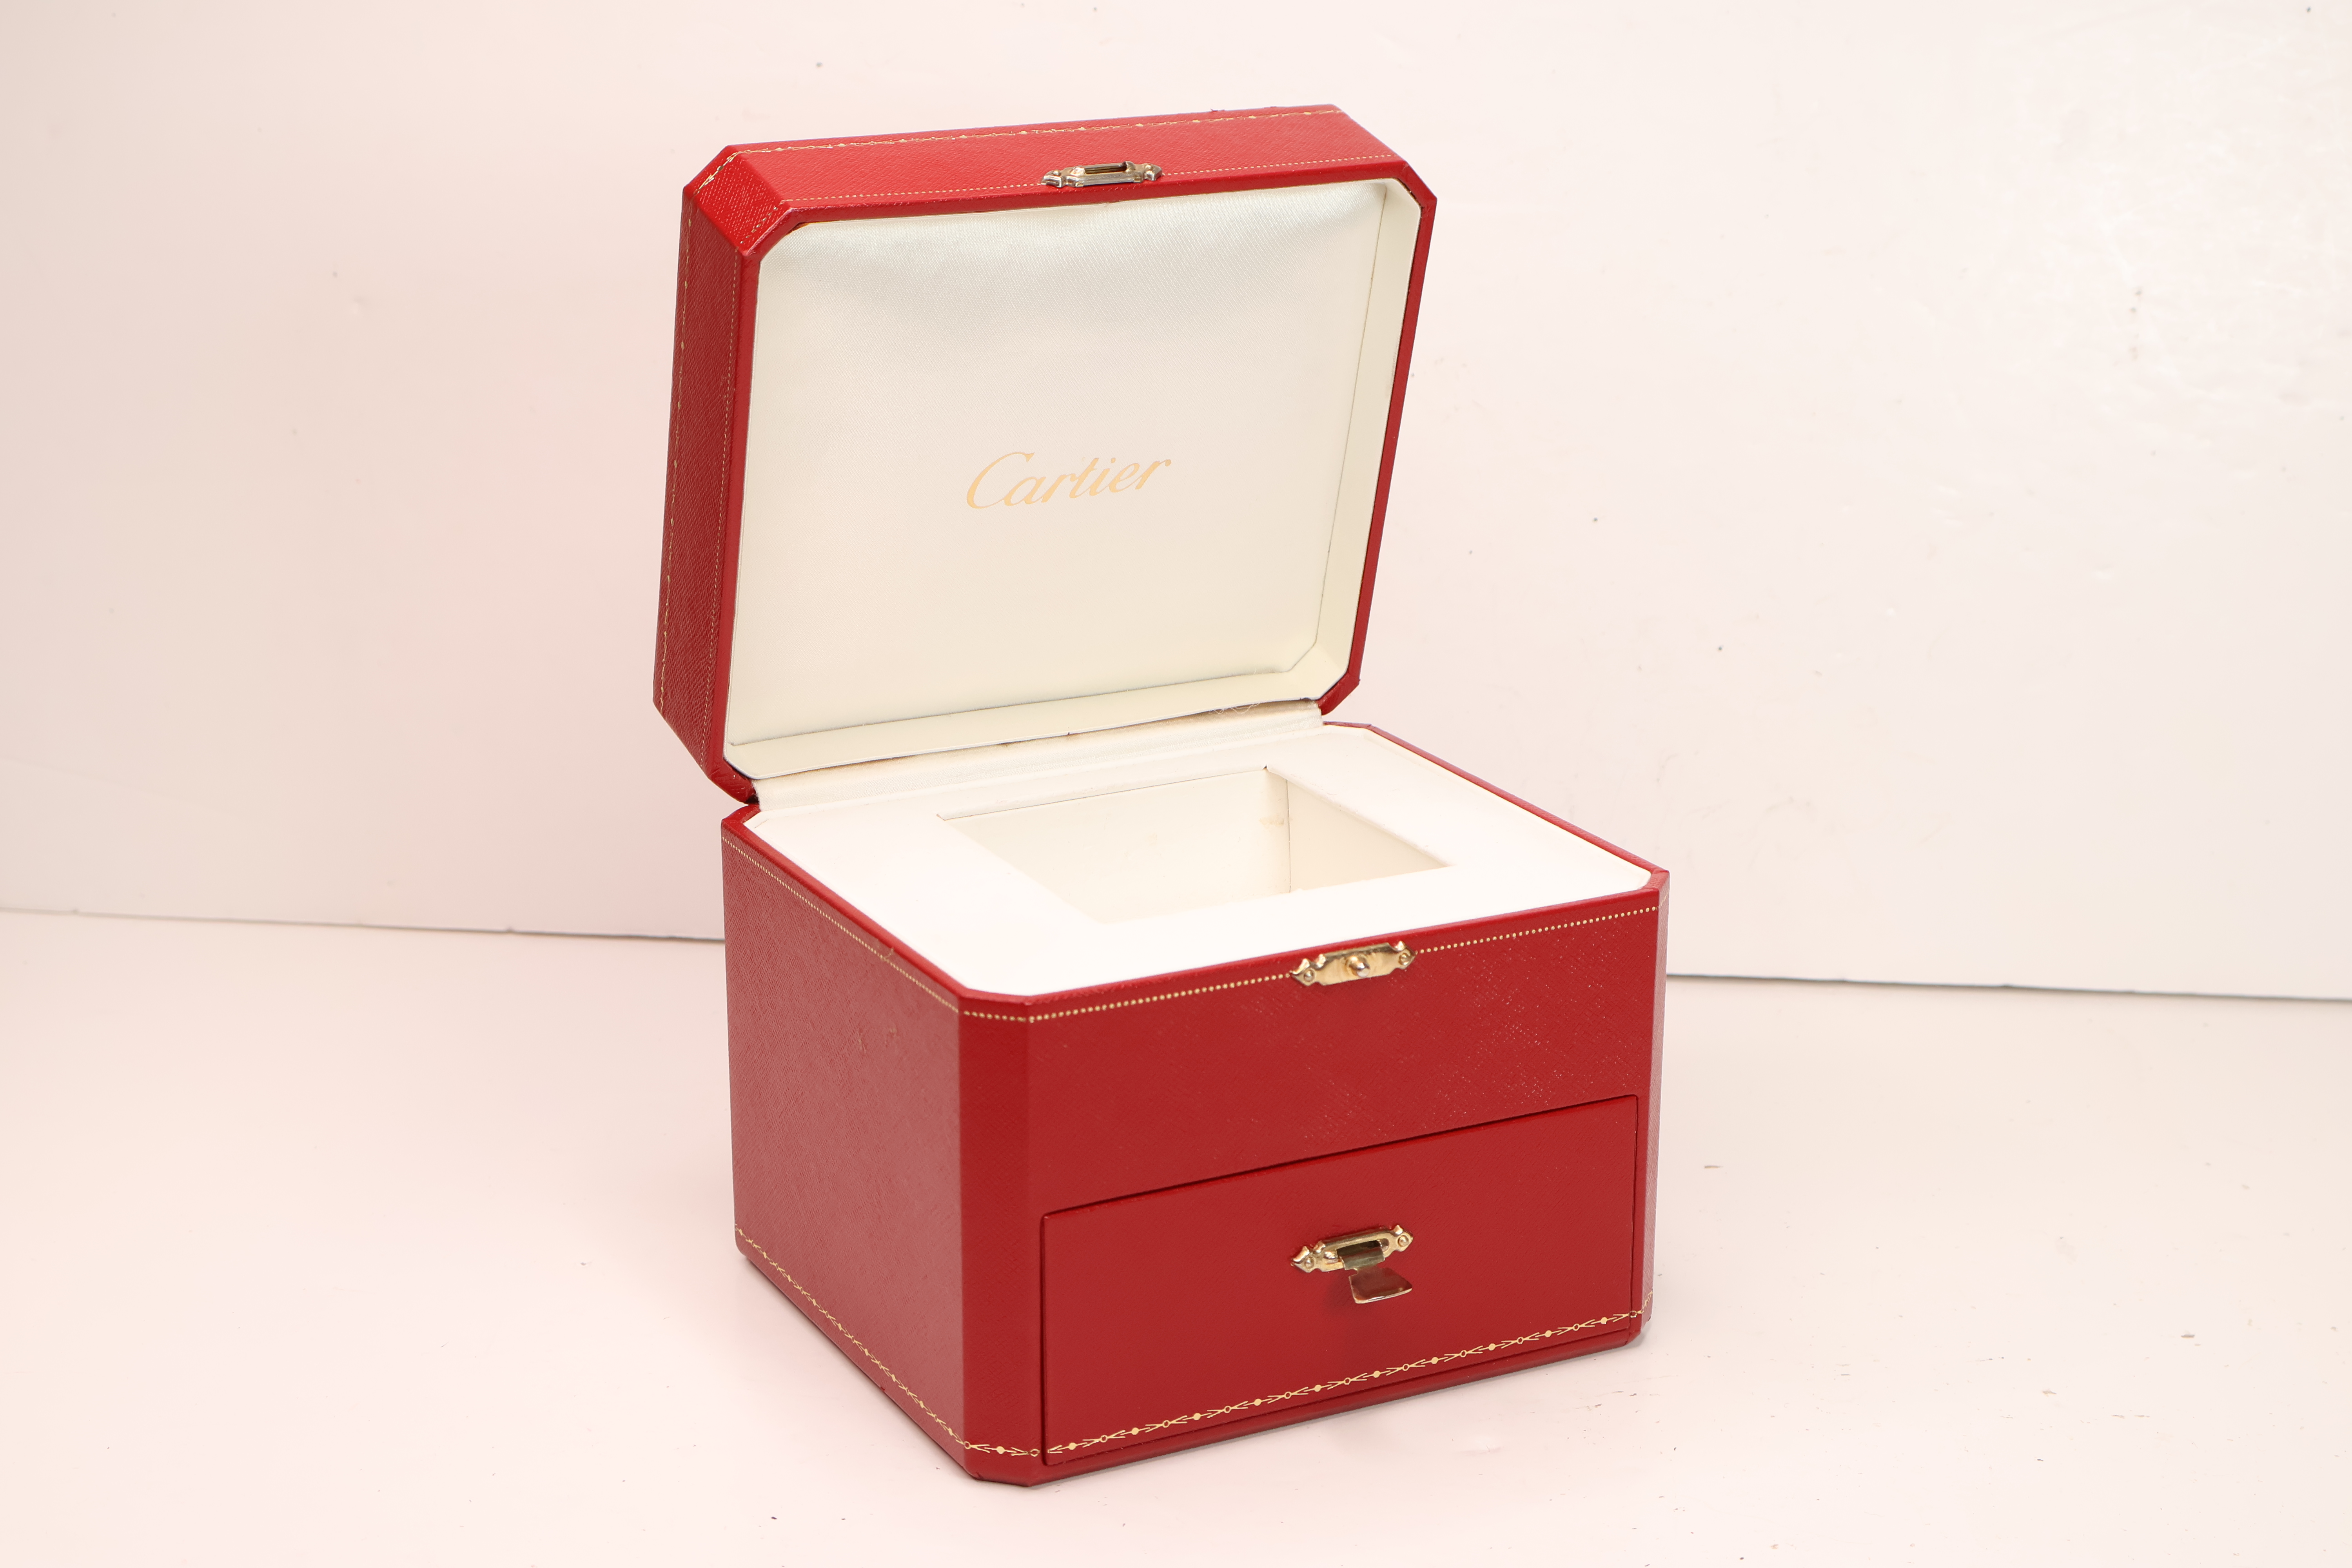 *To Be Sold Without Reserve* Cartier Watch Box, with draw, missing cushion, clasp A/F